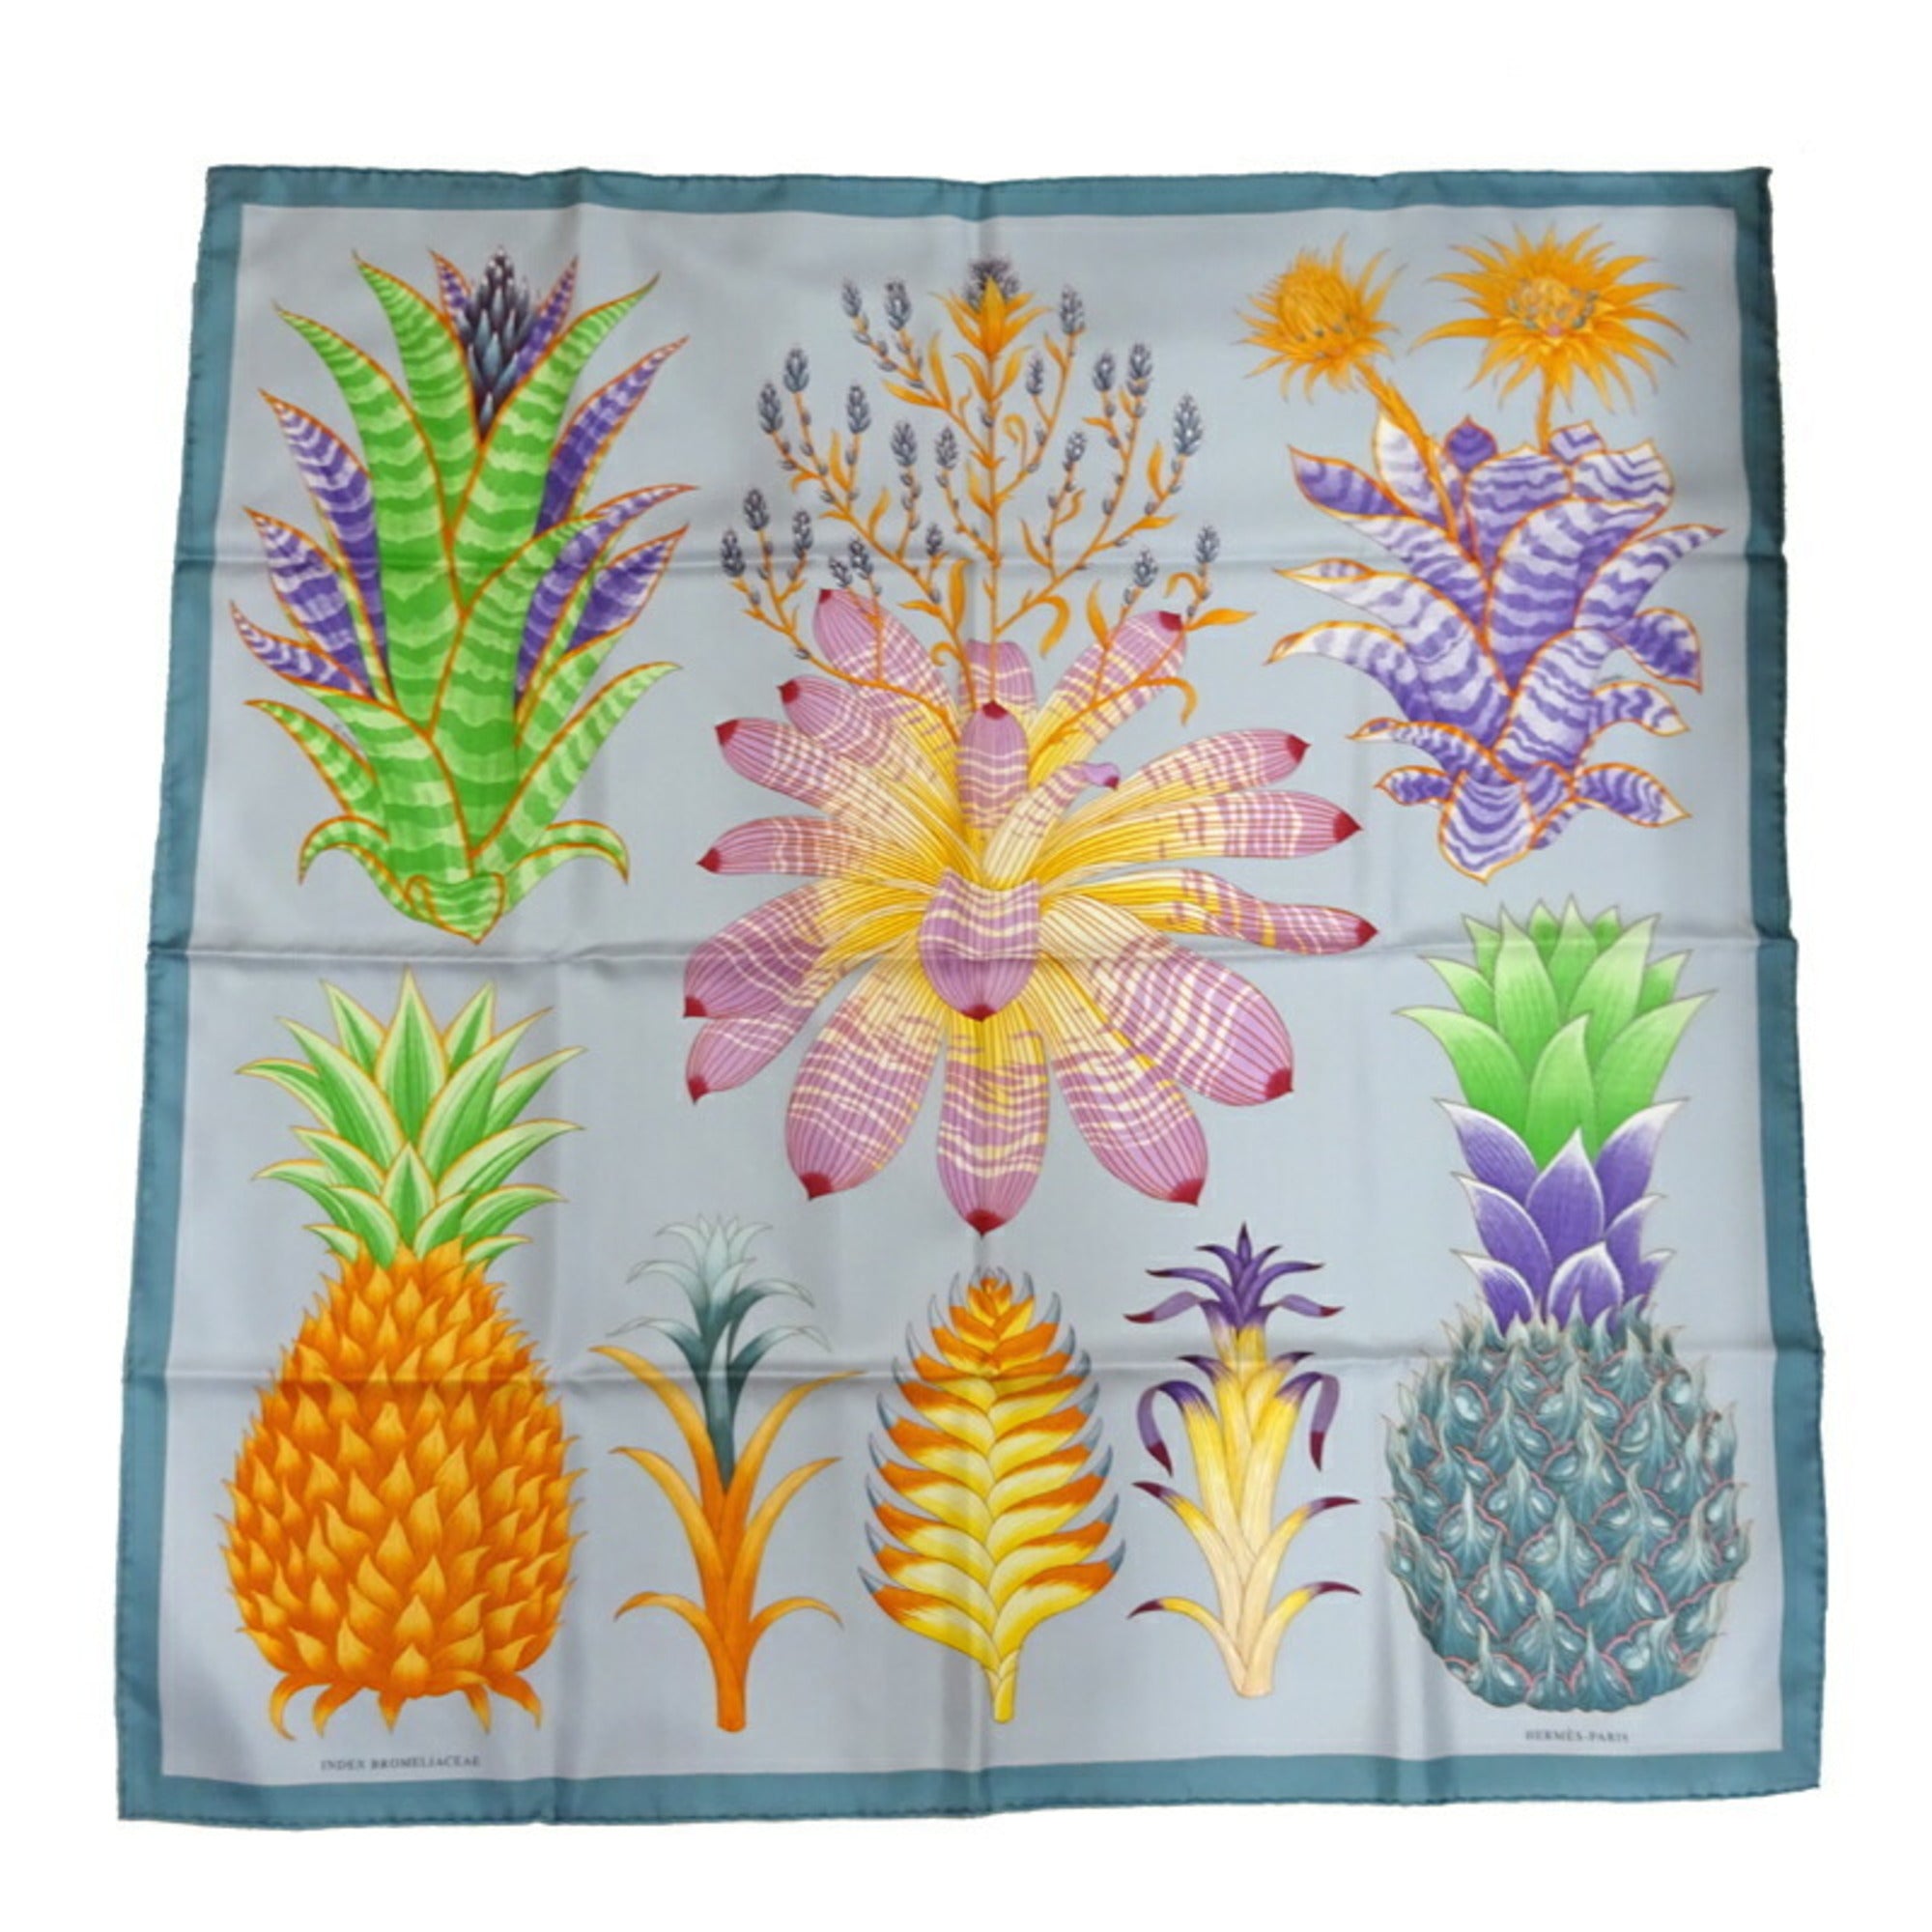 Shop HERMES 2022 SS Index Bromeliaceae Scarf 90 (H003801S 07, H003801S 12,  H003801S 13) by lufine